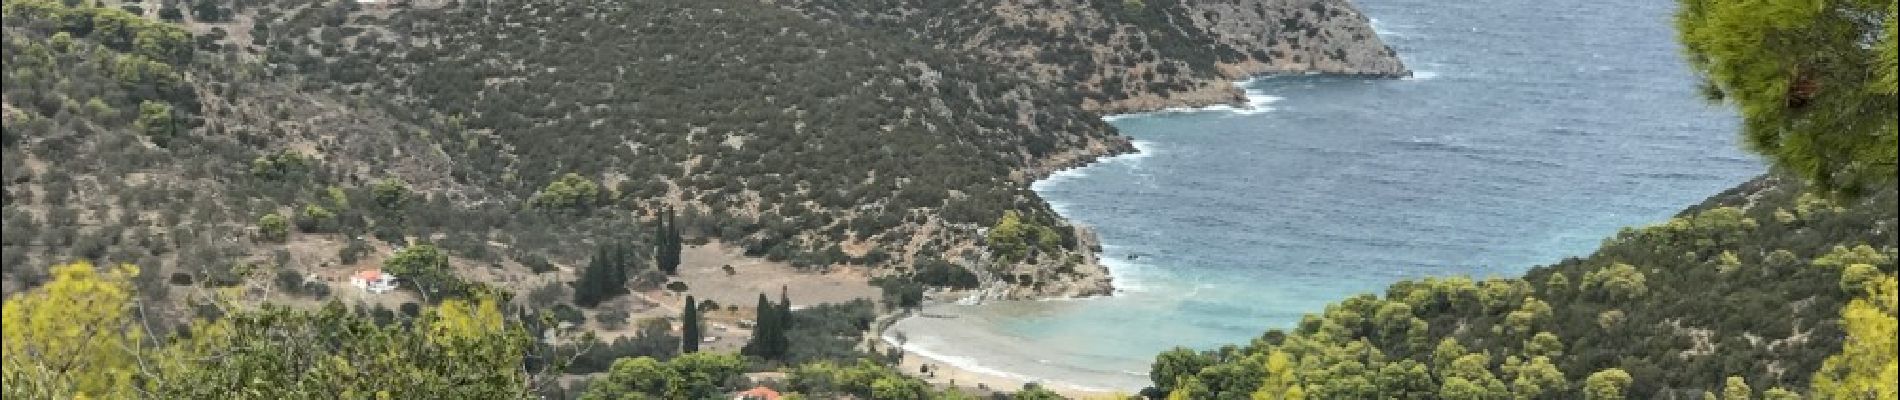 Tocht Stappen Unknown - 20180925 Scooter sur Poros - Photo